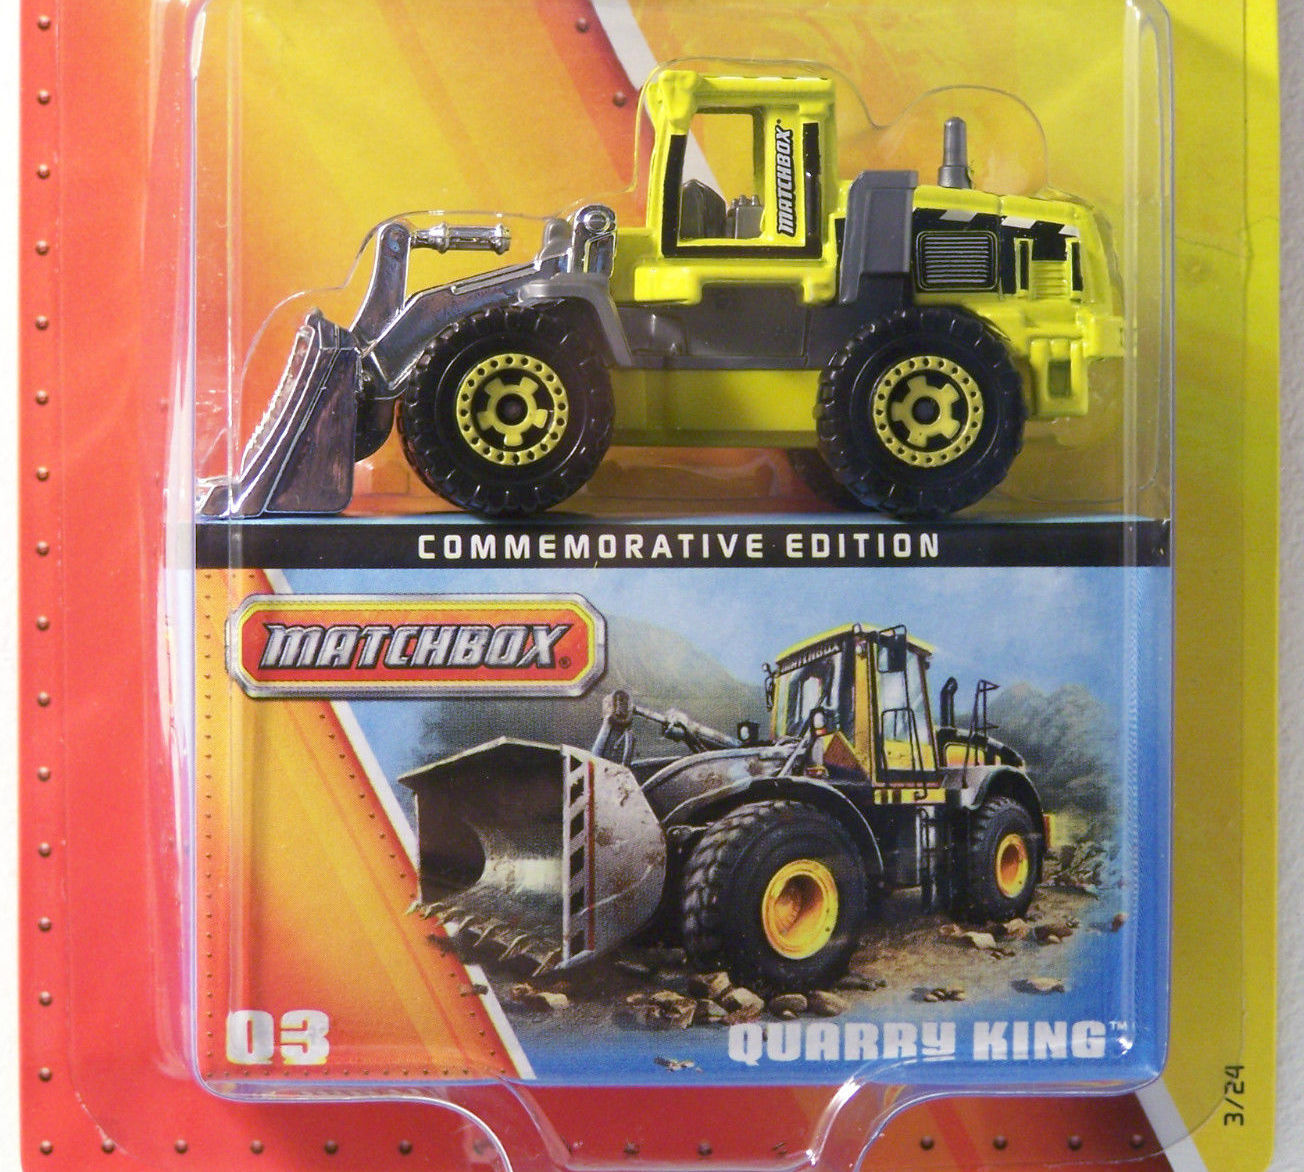 Matchbox 2012 Mbx Island Quarry King 1 10 Yellow Green - roblox series lord umberhallow uber hallow toys figure core